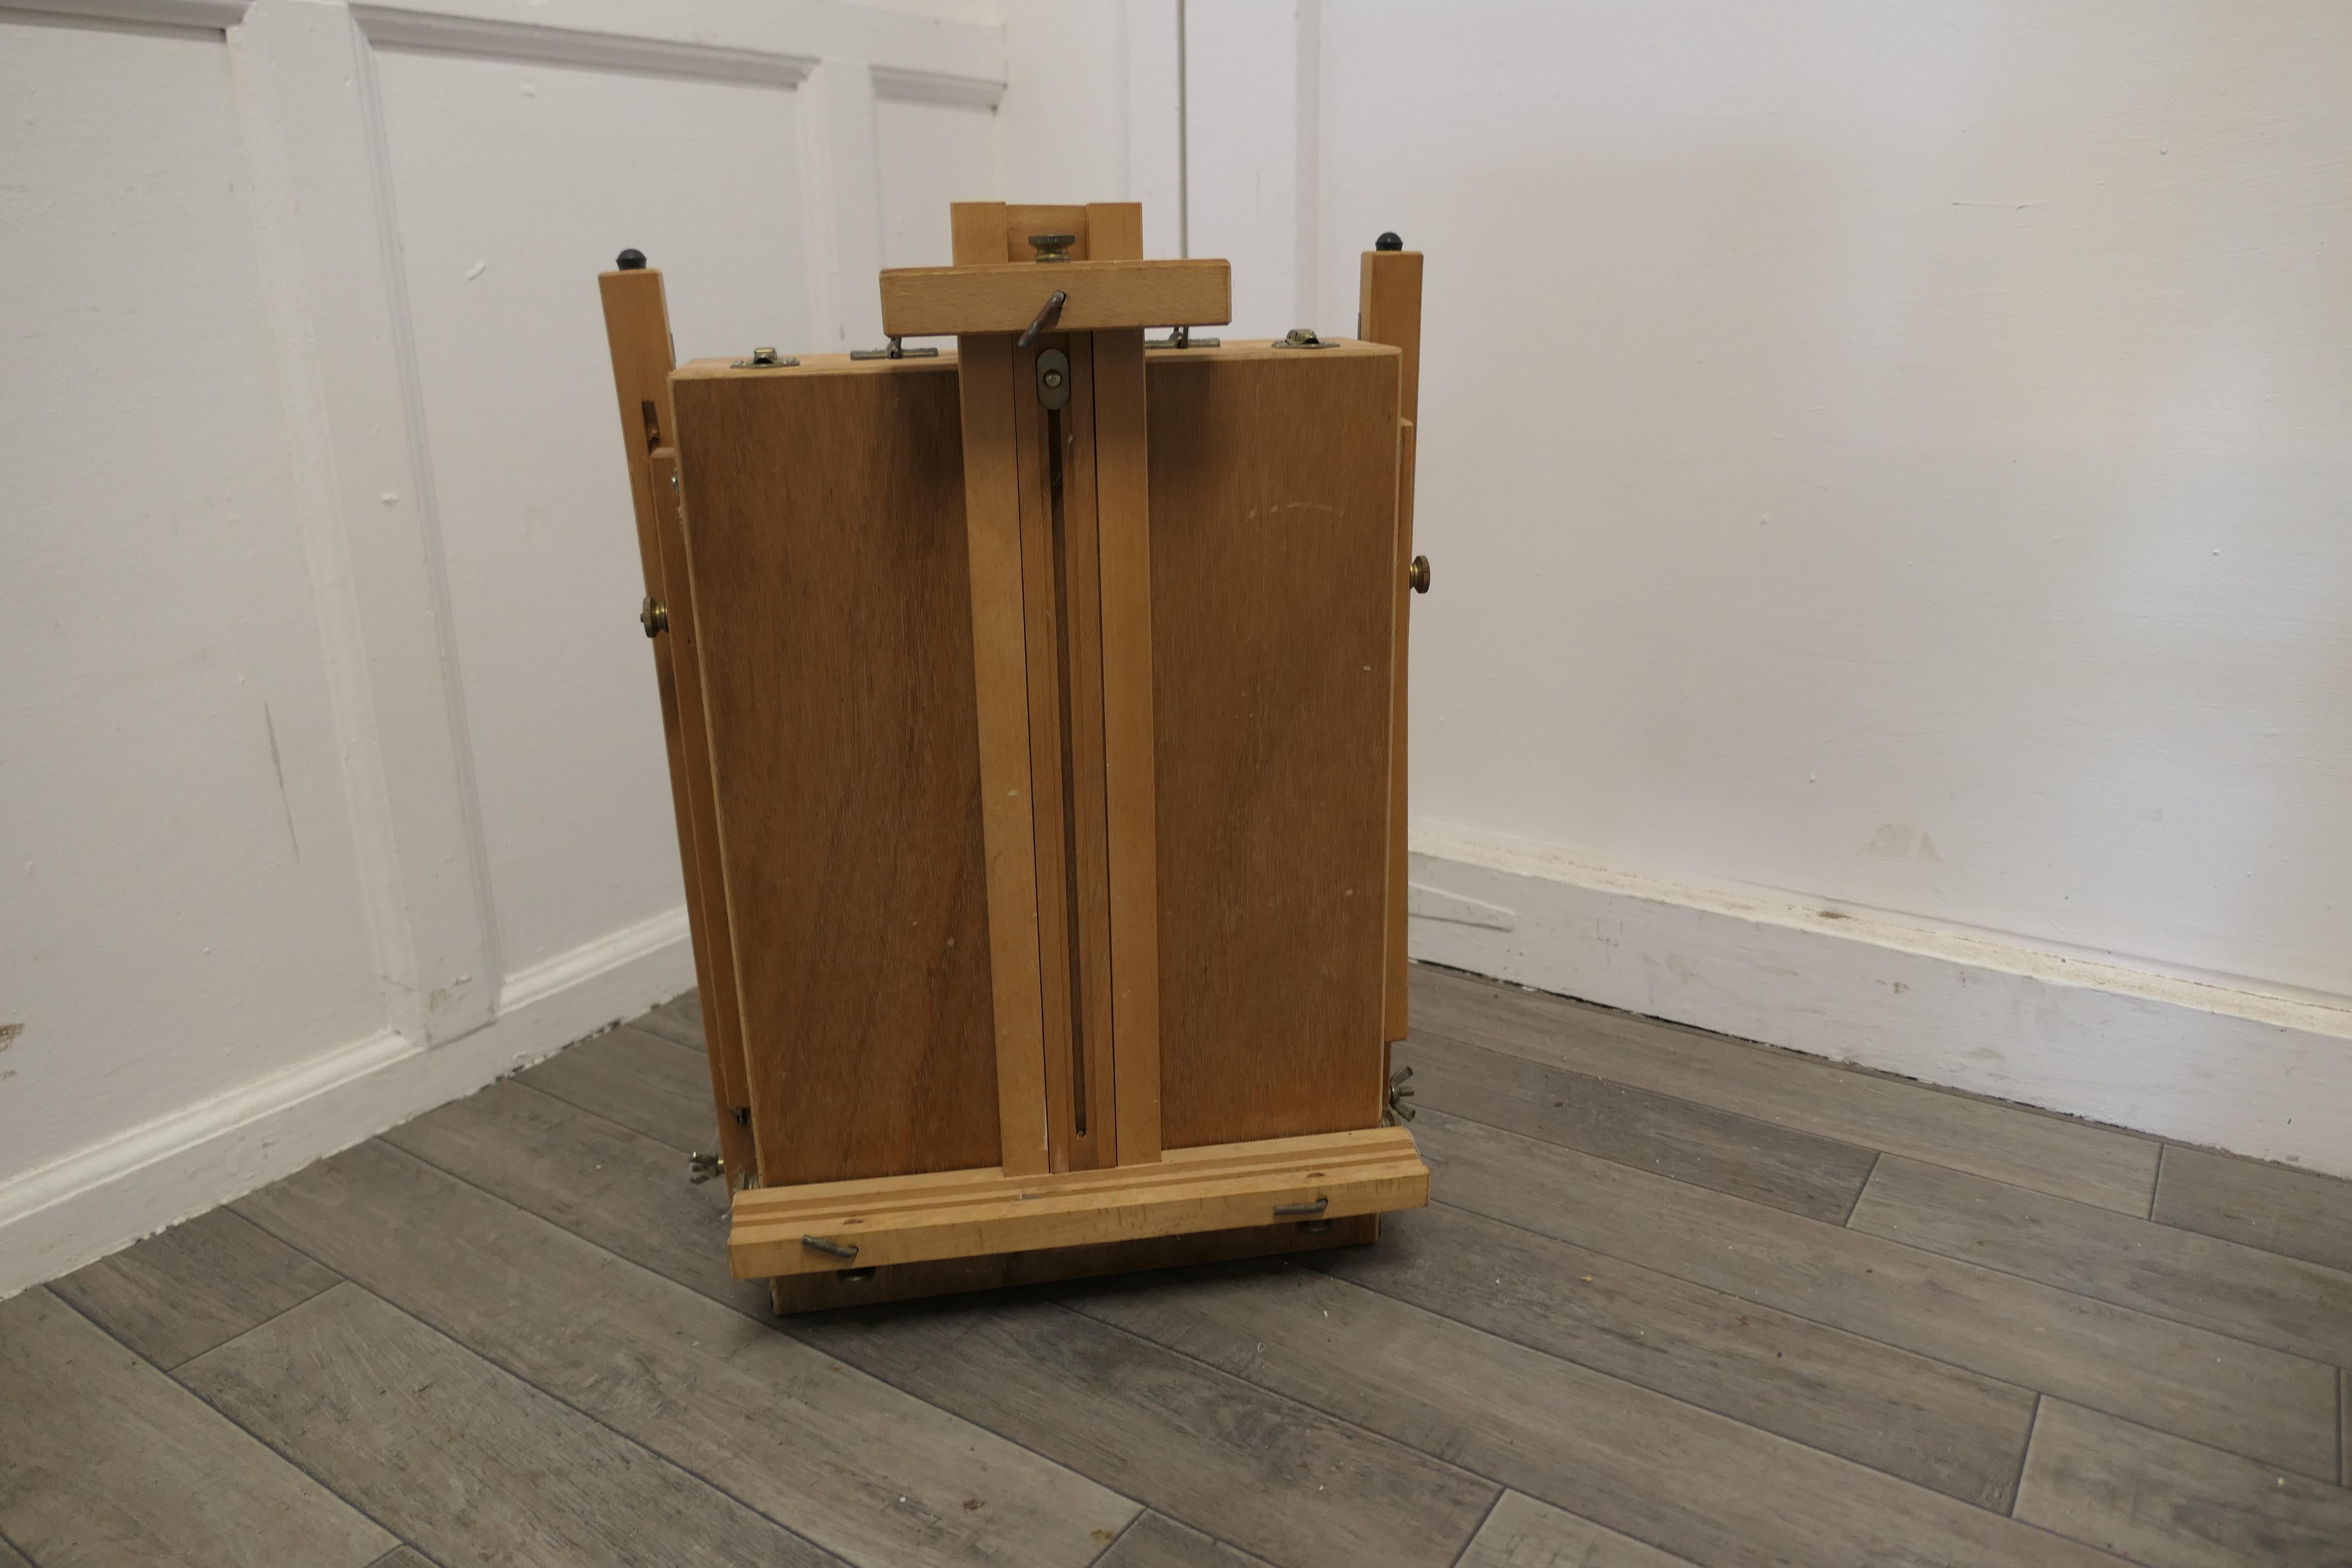 A French folding easel, artists suitcase easel and pallet. 
 
This charming set comes from Paris, the easel folds down completely into a delightful and easy to carry suitcase form, the pallet fits inside making it the perfect carry anywhere